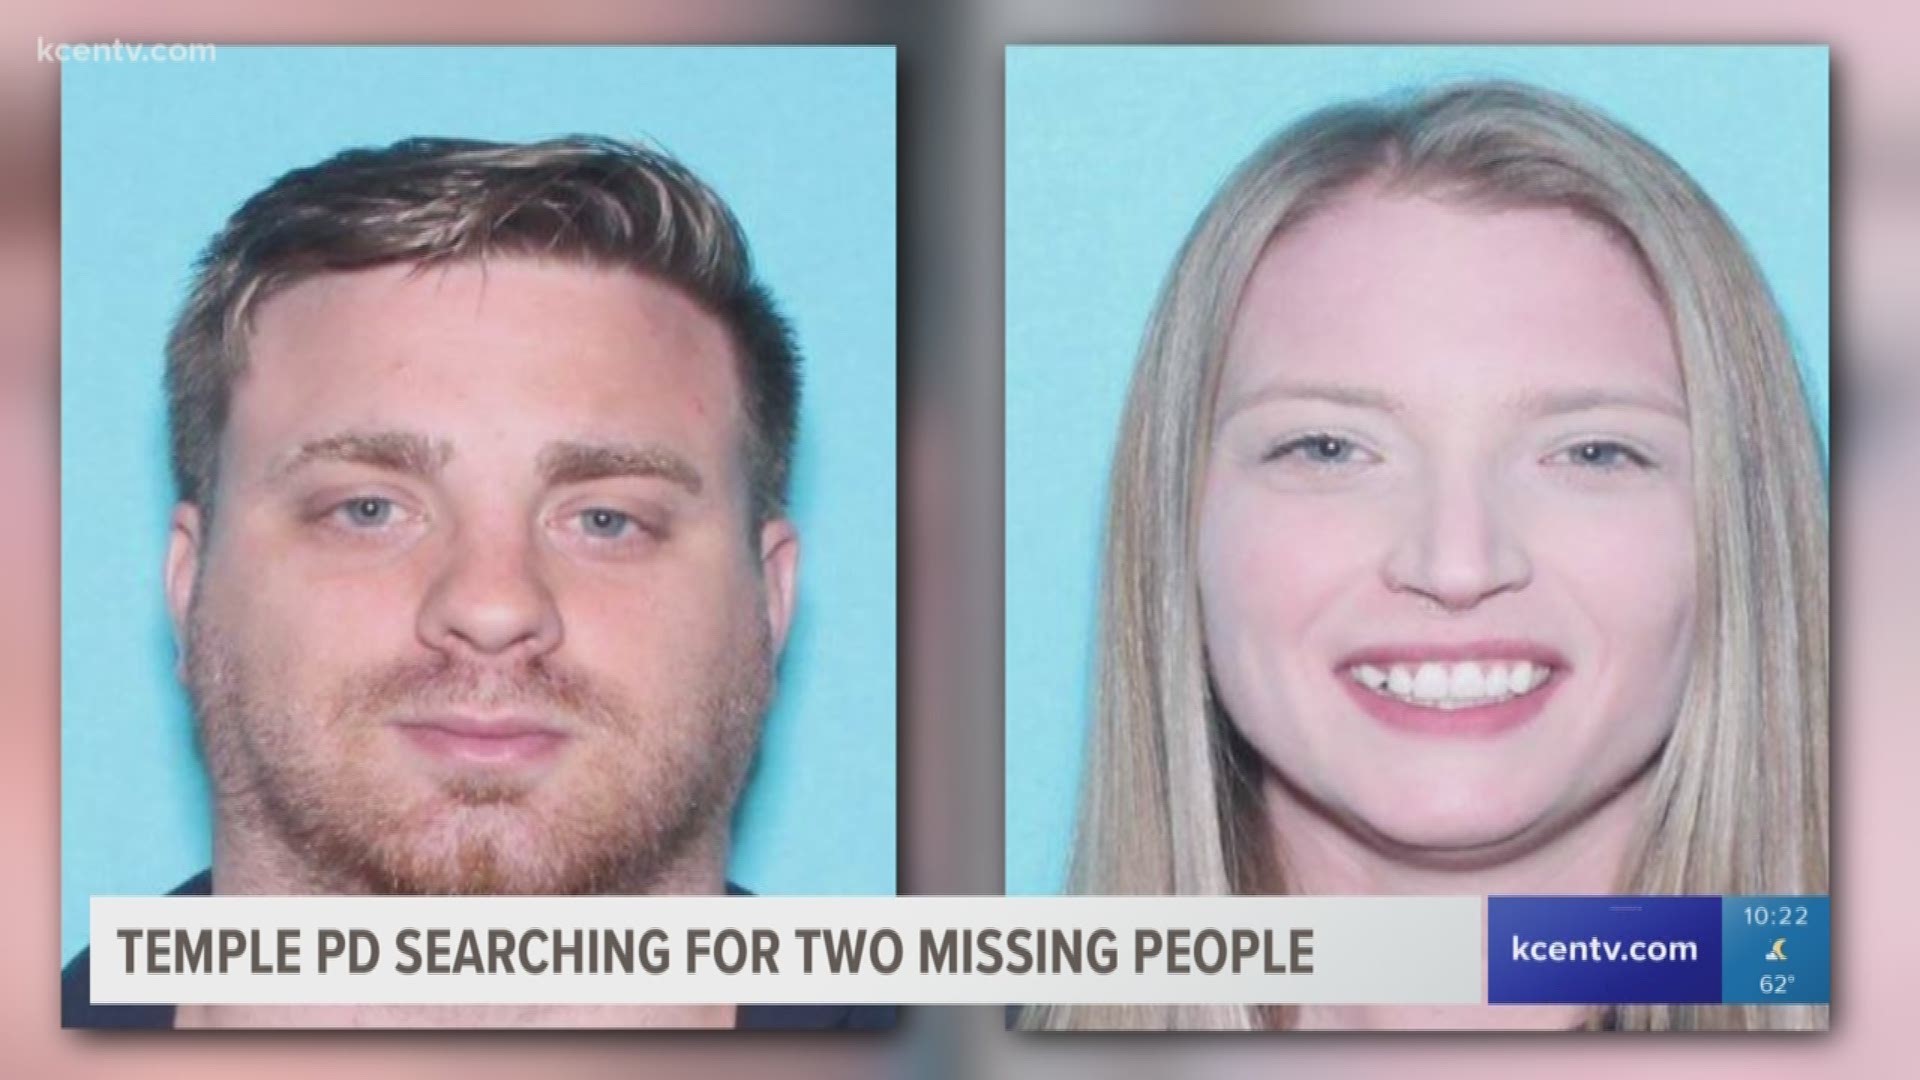 The Temple Police Department asked for the public's help finding two people who went missing Friday.